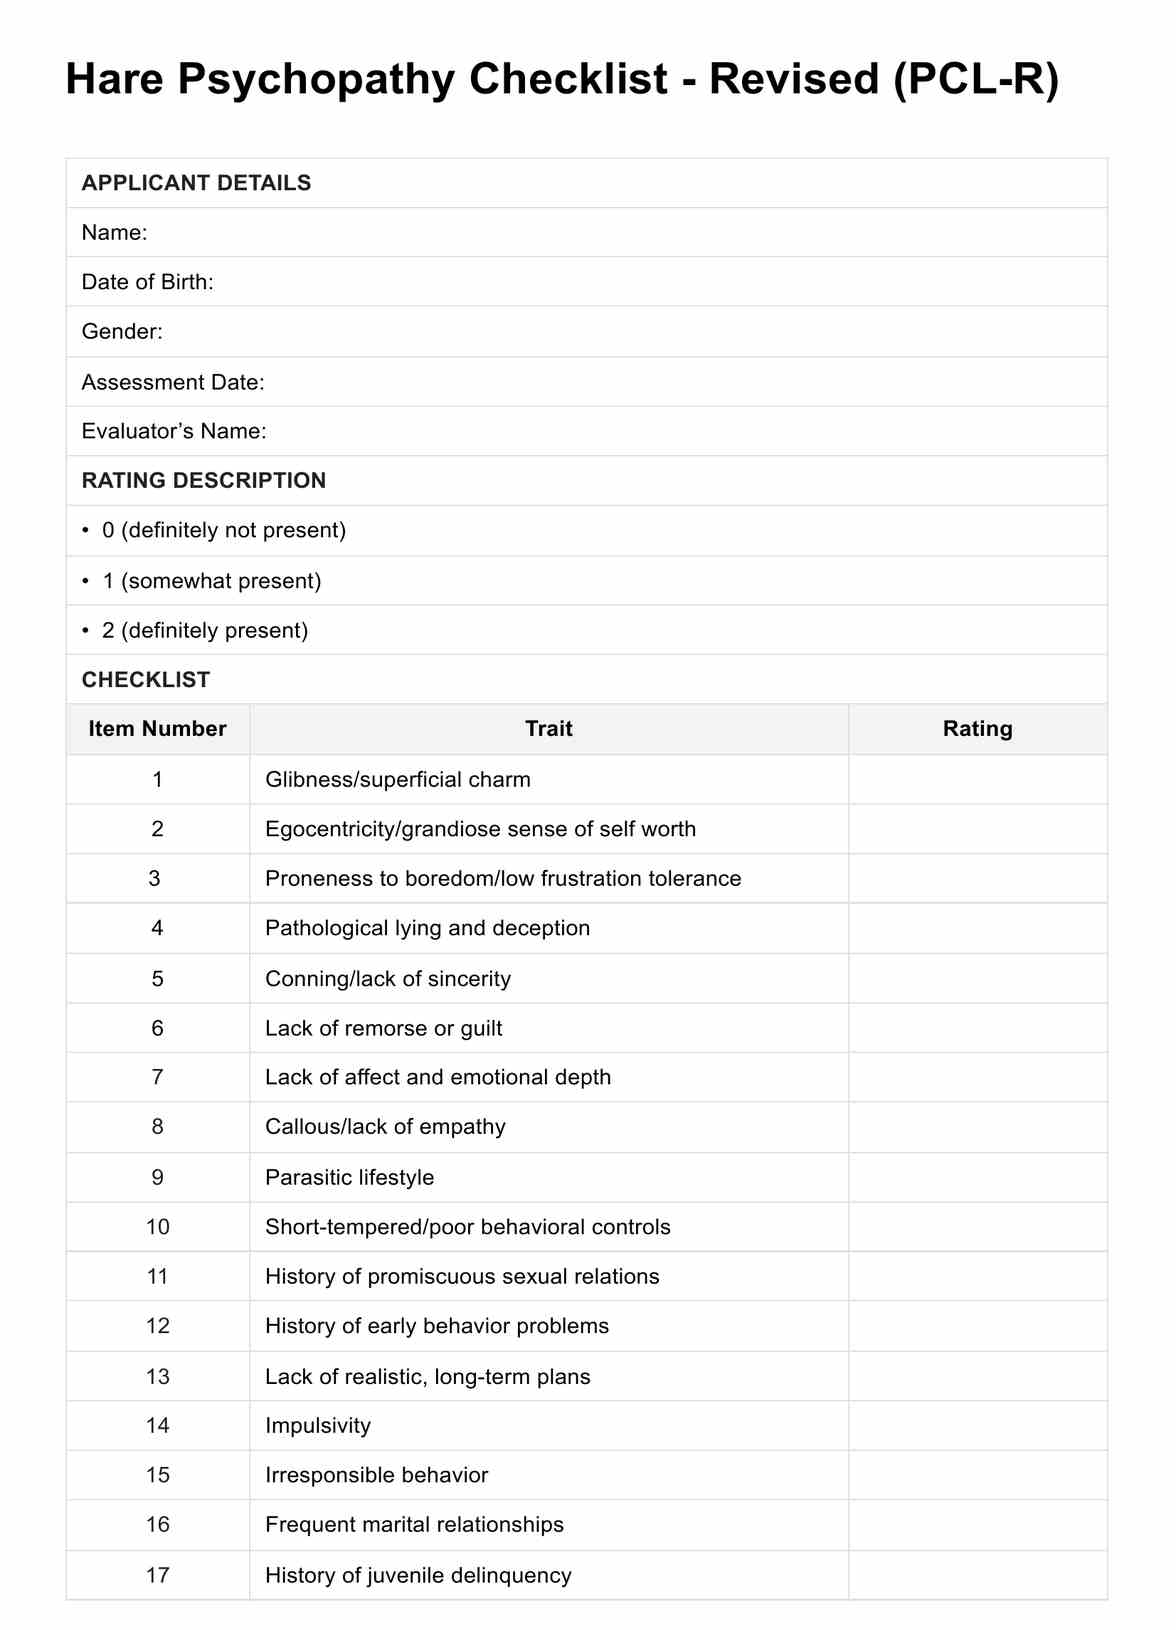 Hare Psychopathy Checklist - Revised PDF Example